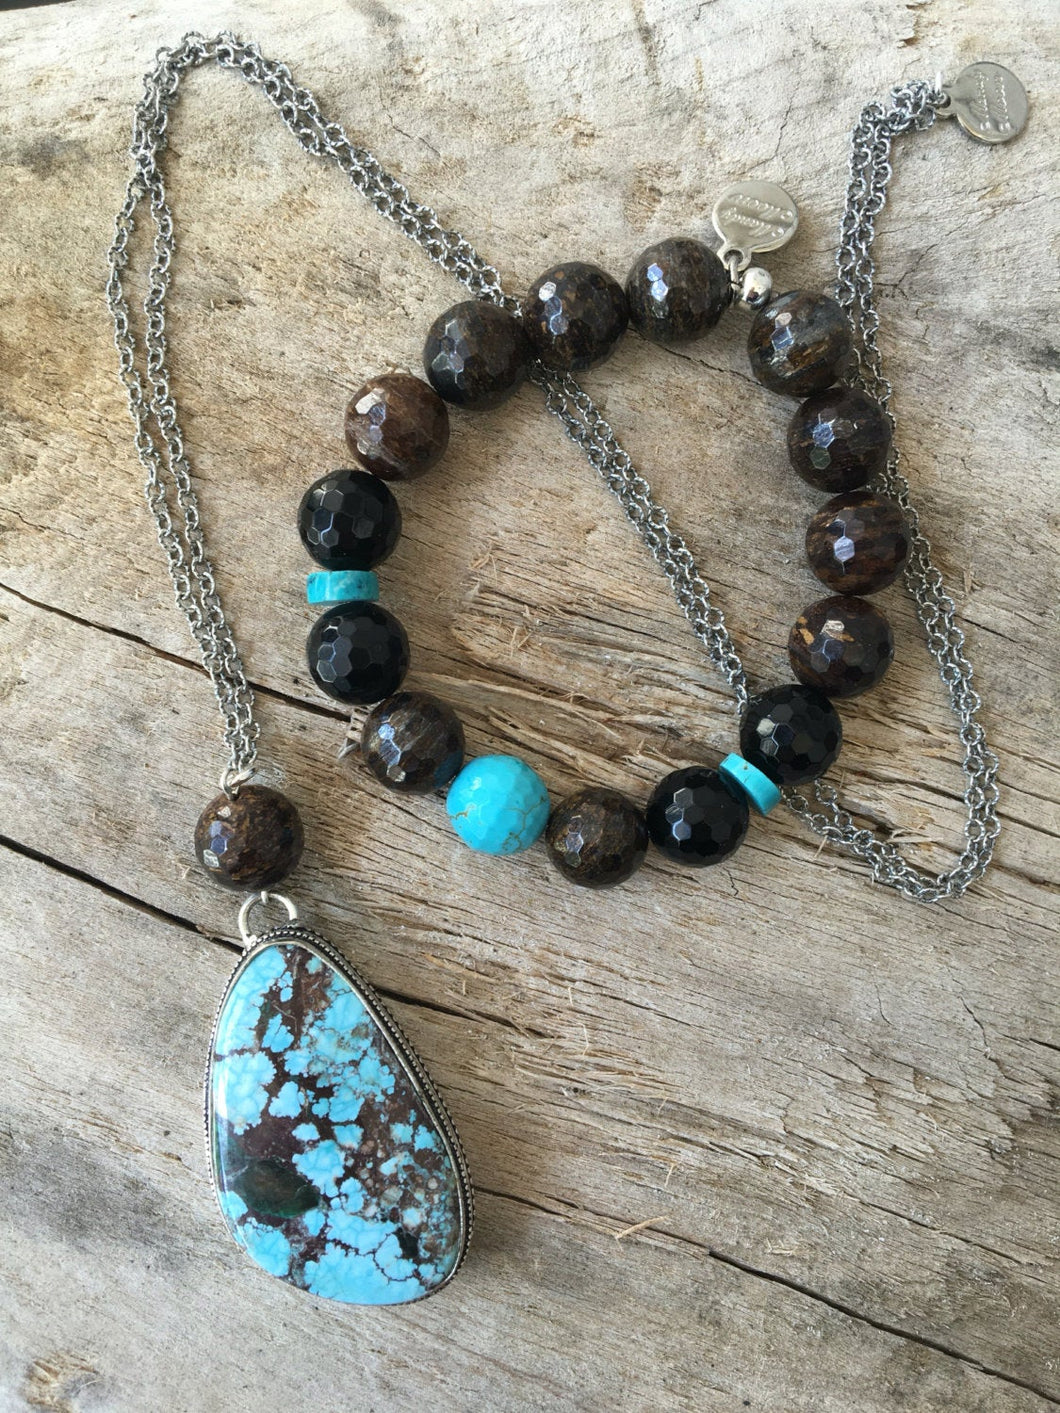 Turquoise and bronzite necklace and bracelet set in sterling silver